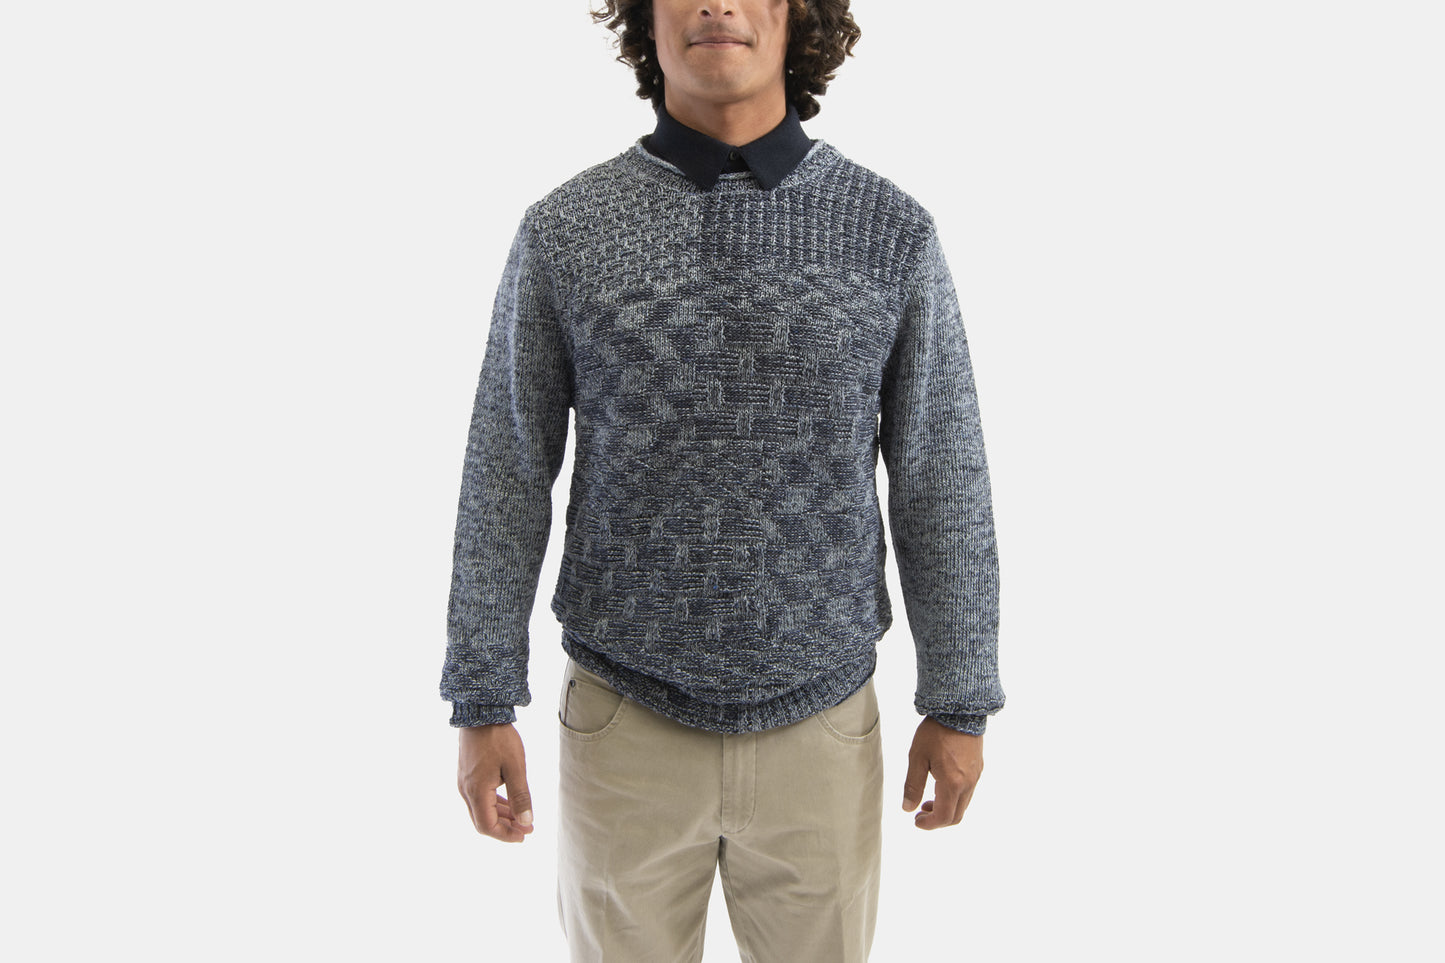 Inis Meáin – blue sweater